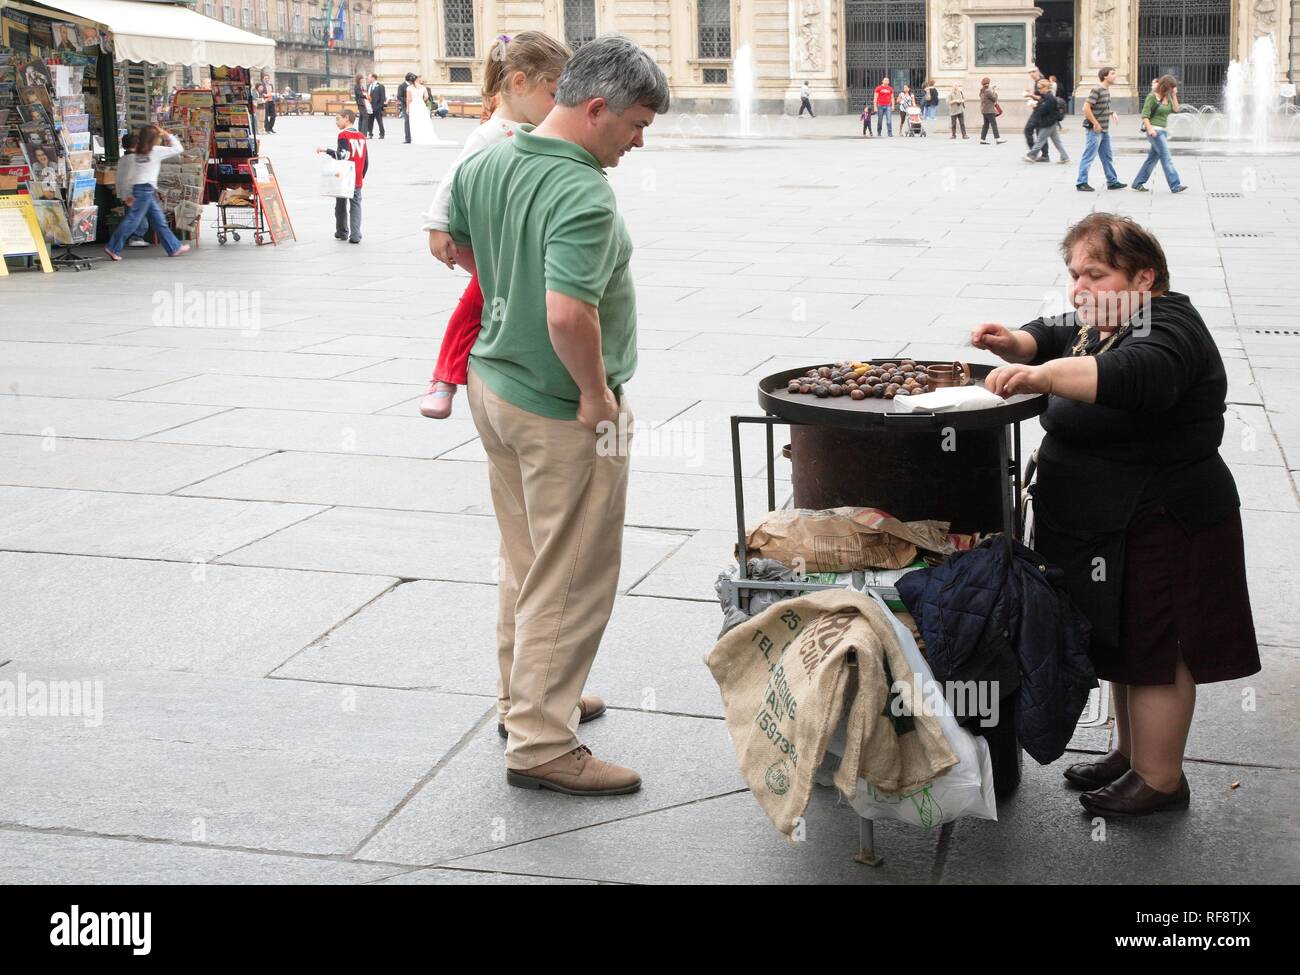 Woman with dwarfism selling sweet chestnuts in Turin, Piedmont, Italy, Europe Stock Photo